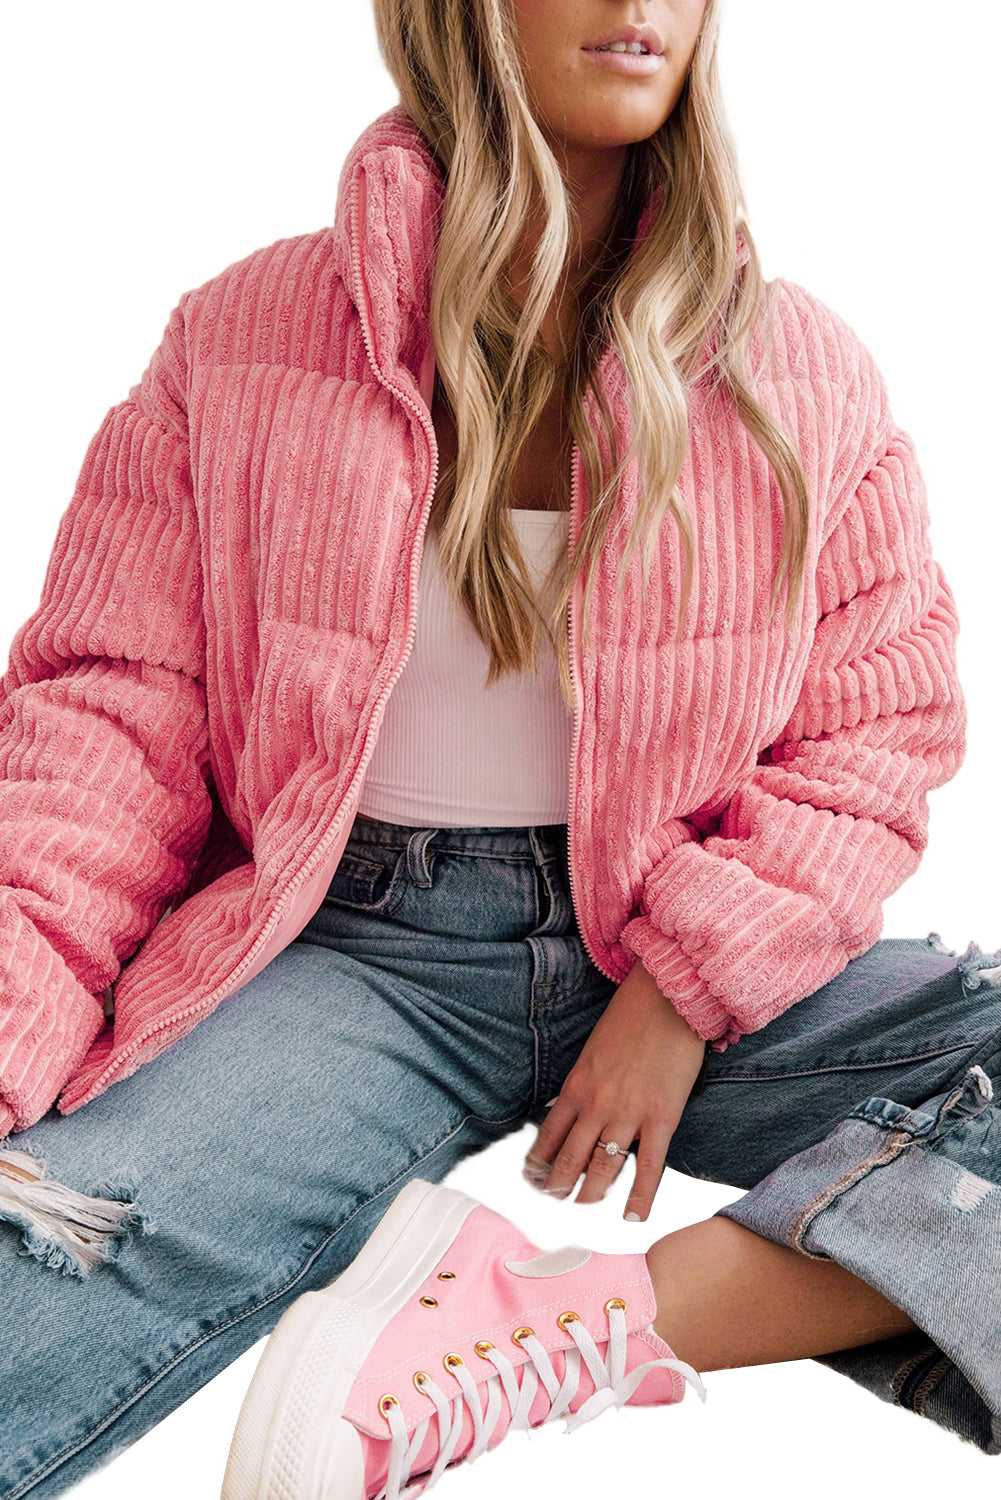 blossom corduroy puffer jacket - only large left!